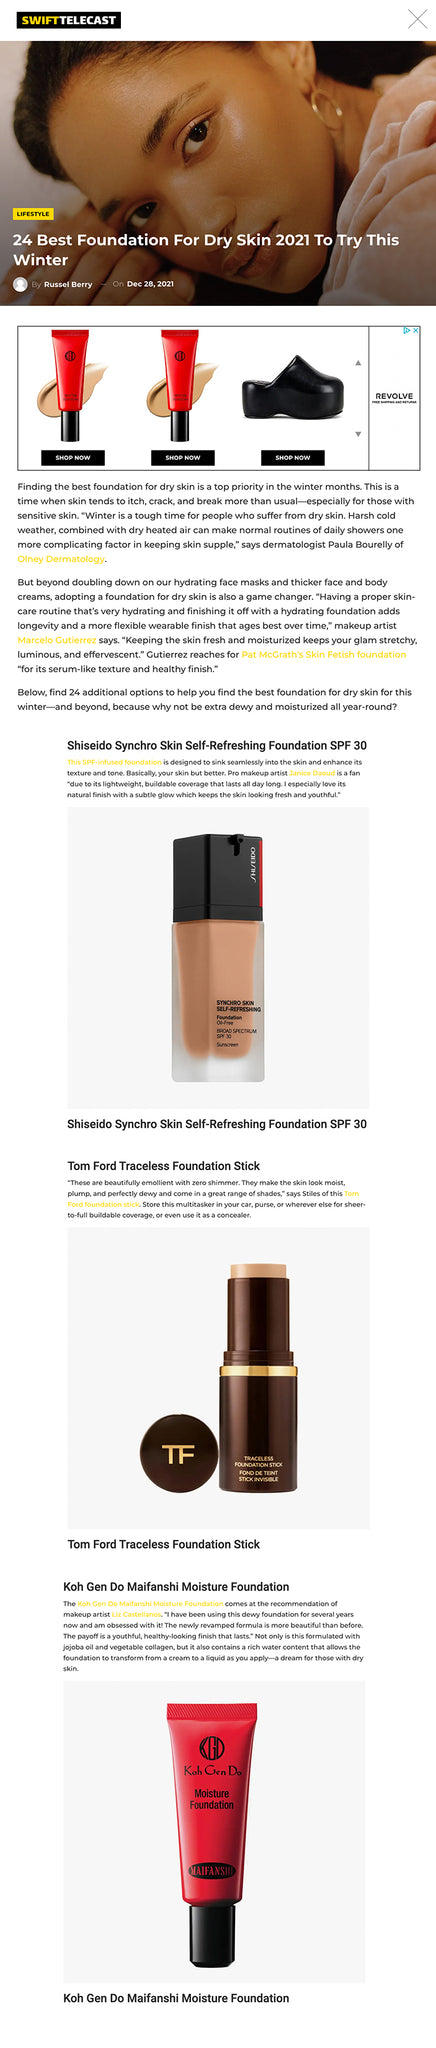 Finding the best foundation for dry skin is a top priority in the winter months. This is a time when skin tends to itch, crack, and break more than usual—especially for those with sensitive skin. “Winter is a tough time for people who suffer from dry skin. Harsh cold weather, combined with dry heated air can make normal routines of daily showers one more complicating factor in keeping skin supple,” says dermatologist Paula Bourelly of Olney Dermatology.